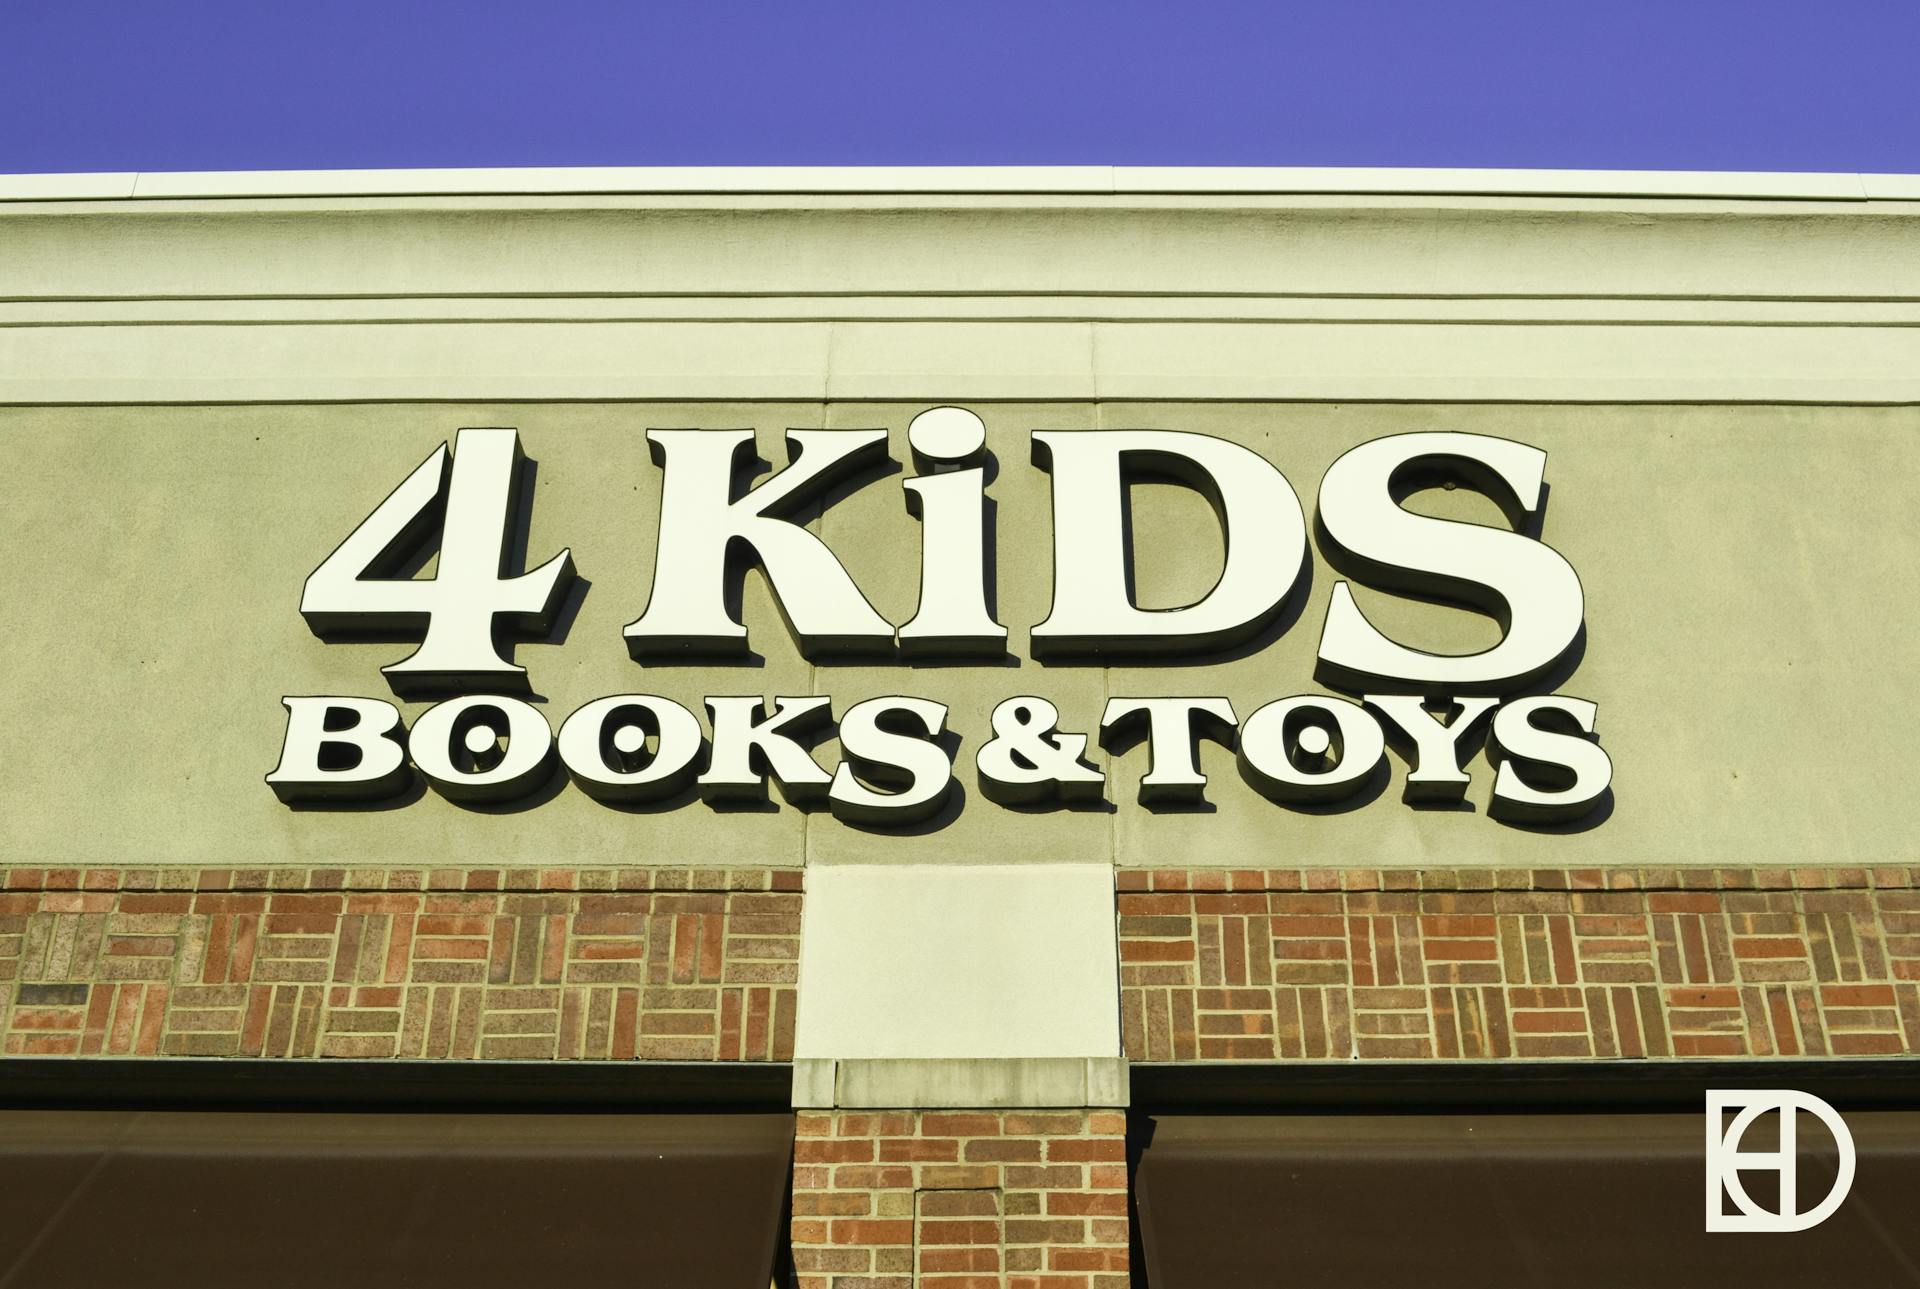 Exterior photo of 4 Kids Books & Toys, showing signage